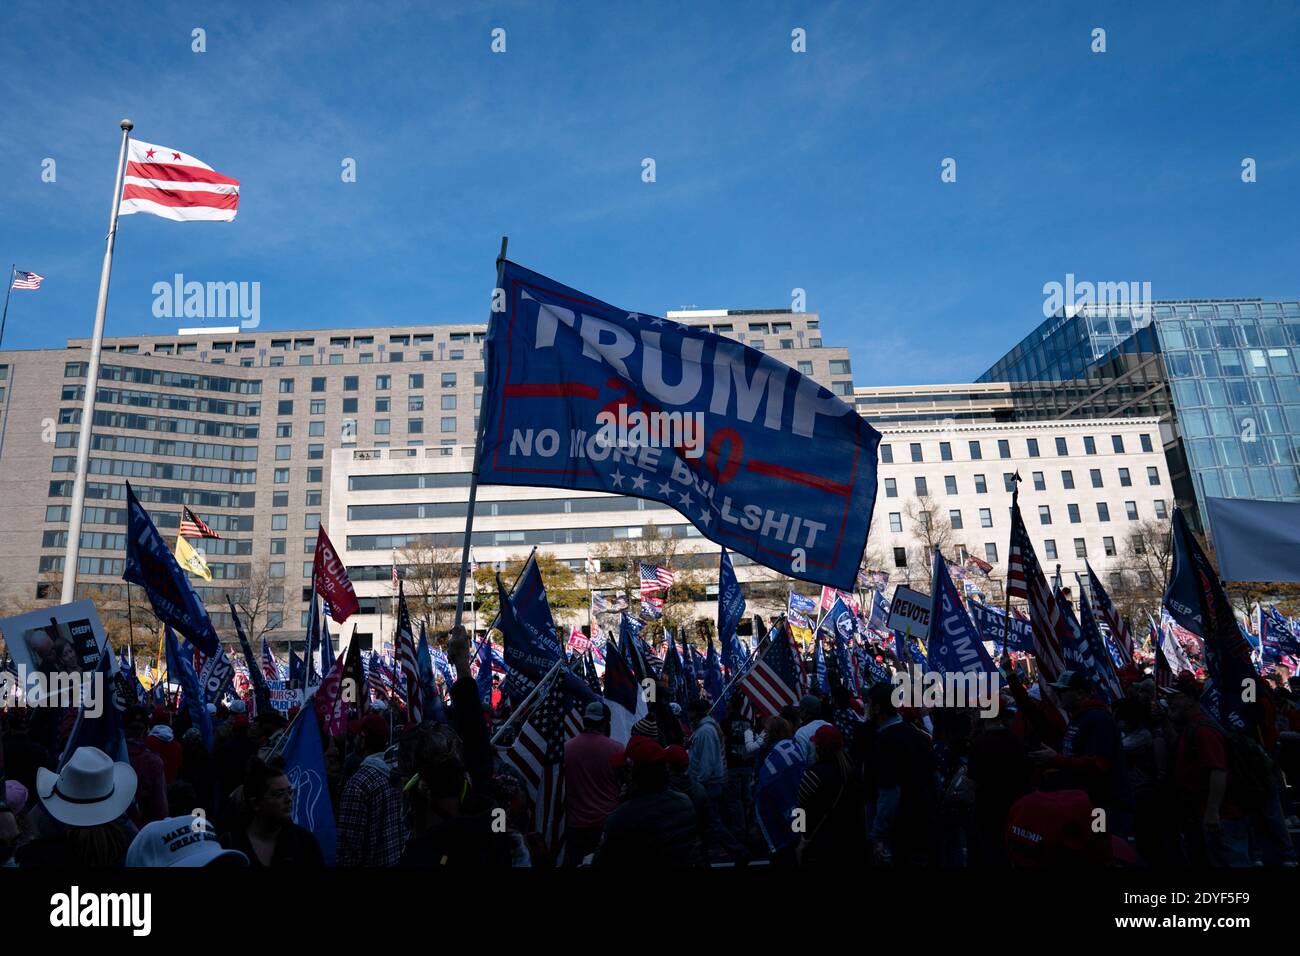 Demonstrators gather during the 'Million MAGA March' at Freedom Plaza in Washington, D.C., U.S., on Saturday, Nov. 14, 2020. The rally comes one week after news organizations projected Joe Biden as the winner of the 2020 election and President Trumps refusal to acknowledge he lost. Credit: Alex Edelman/The Photo Access Stock Photo